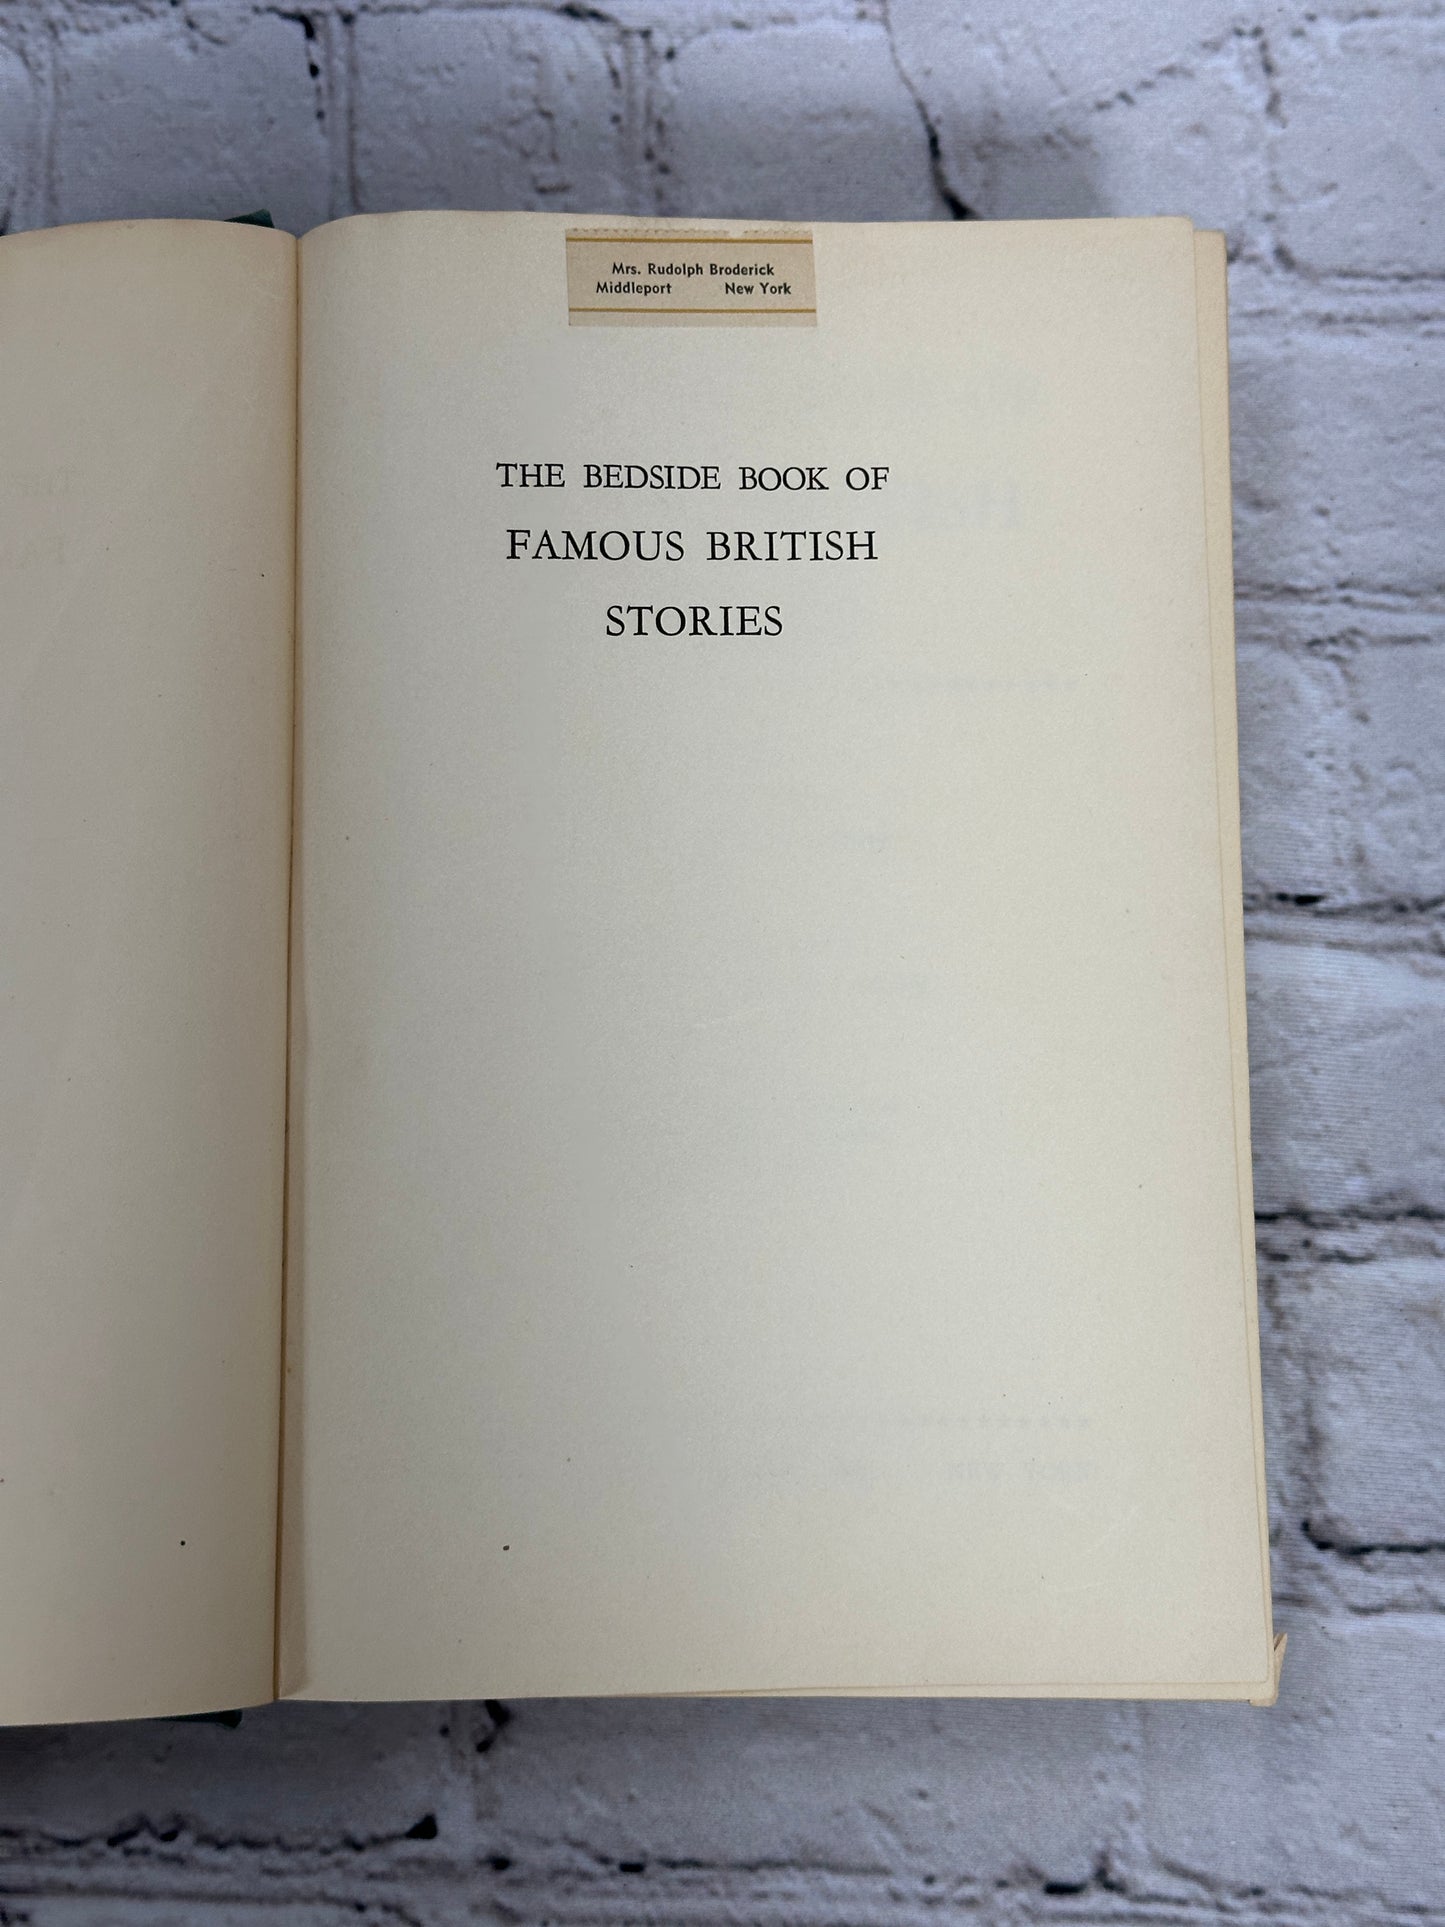 The Bedside Book Of Famous British Stories Edited By Cerf & Moriarity [1940]